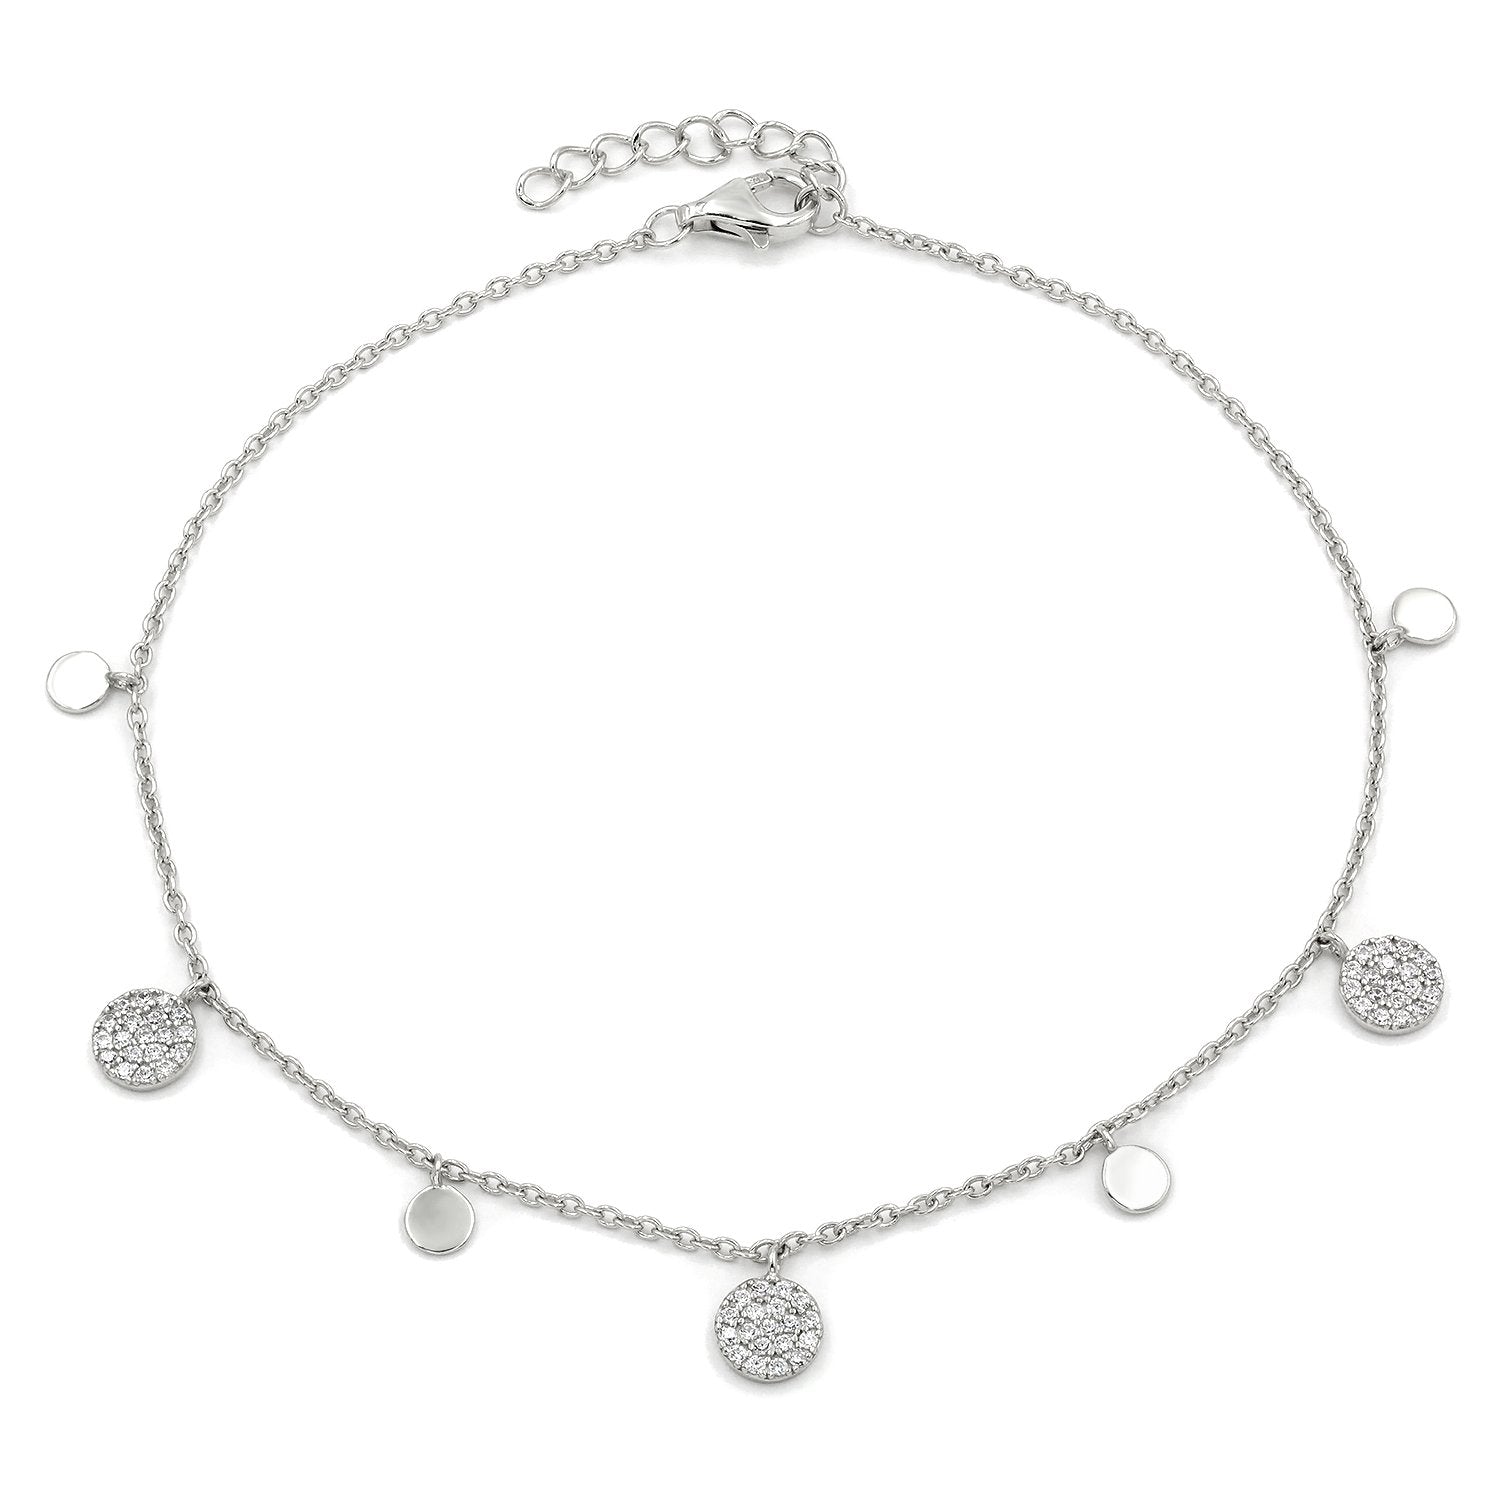 925 Sterling Silver Micro Pave Dangling Disc Ankle Bracelet